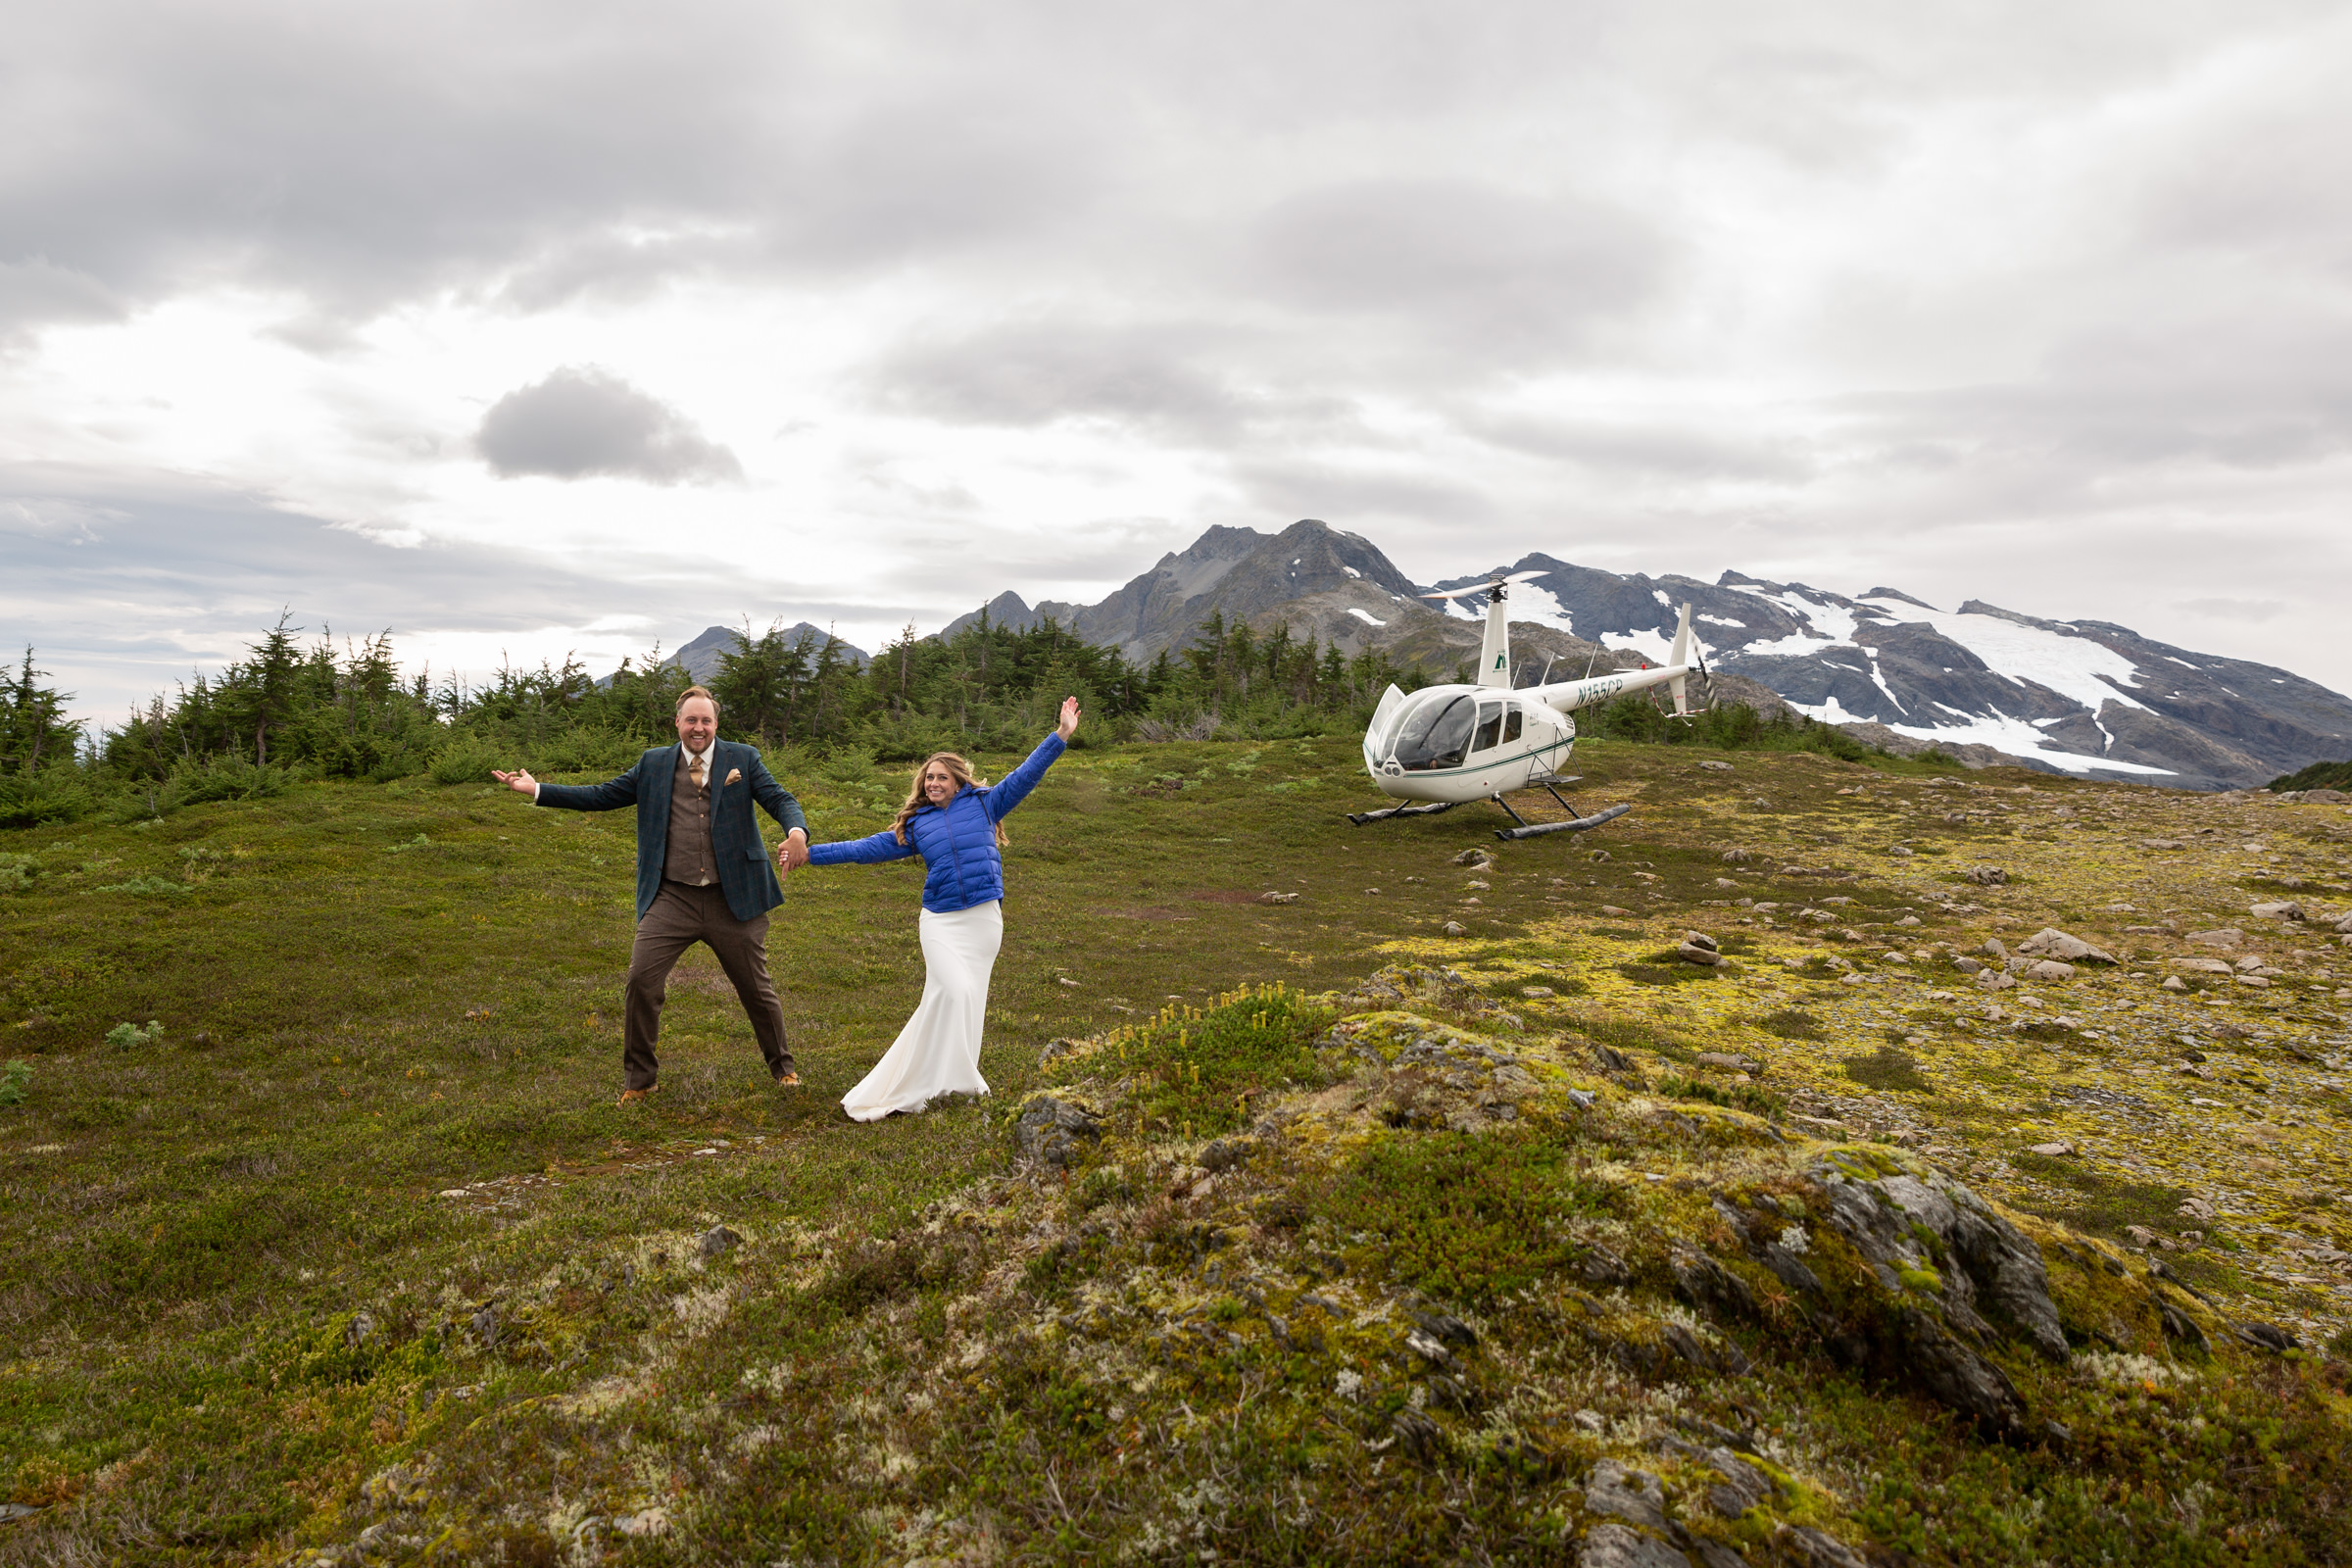 Newlyweds celebrating walking away from their helicopter Alaska elopement, surrounded by snow covered peaks.